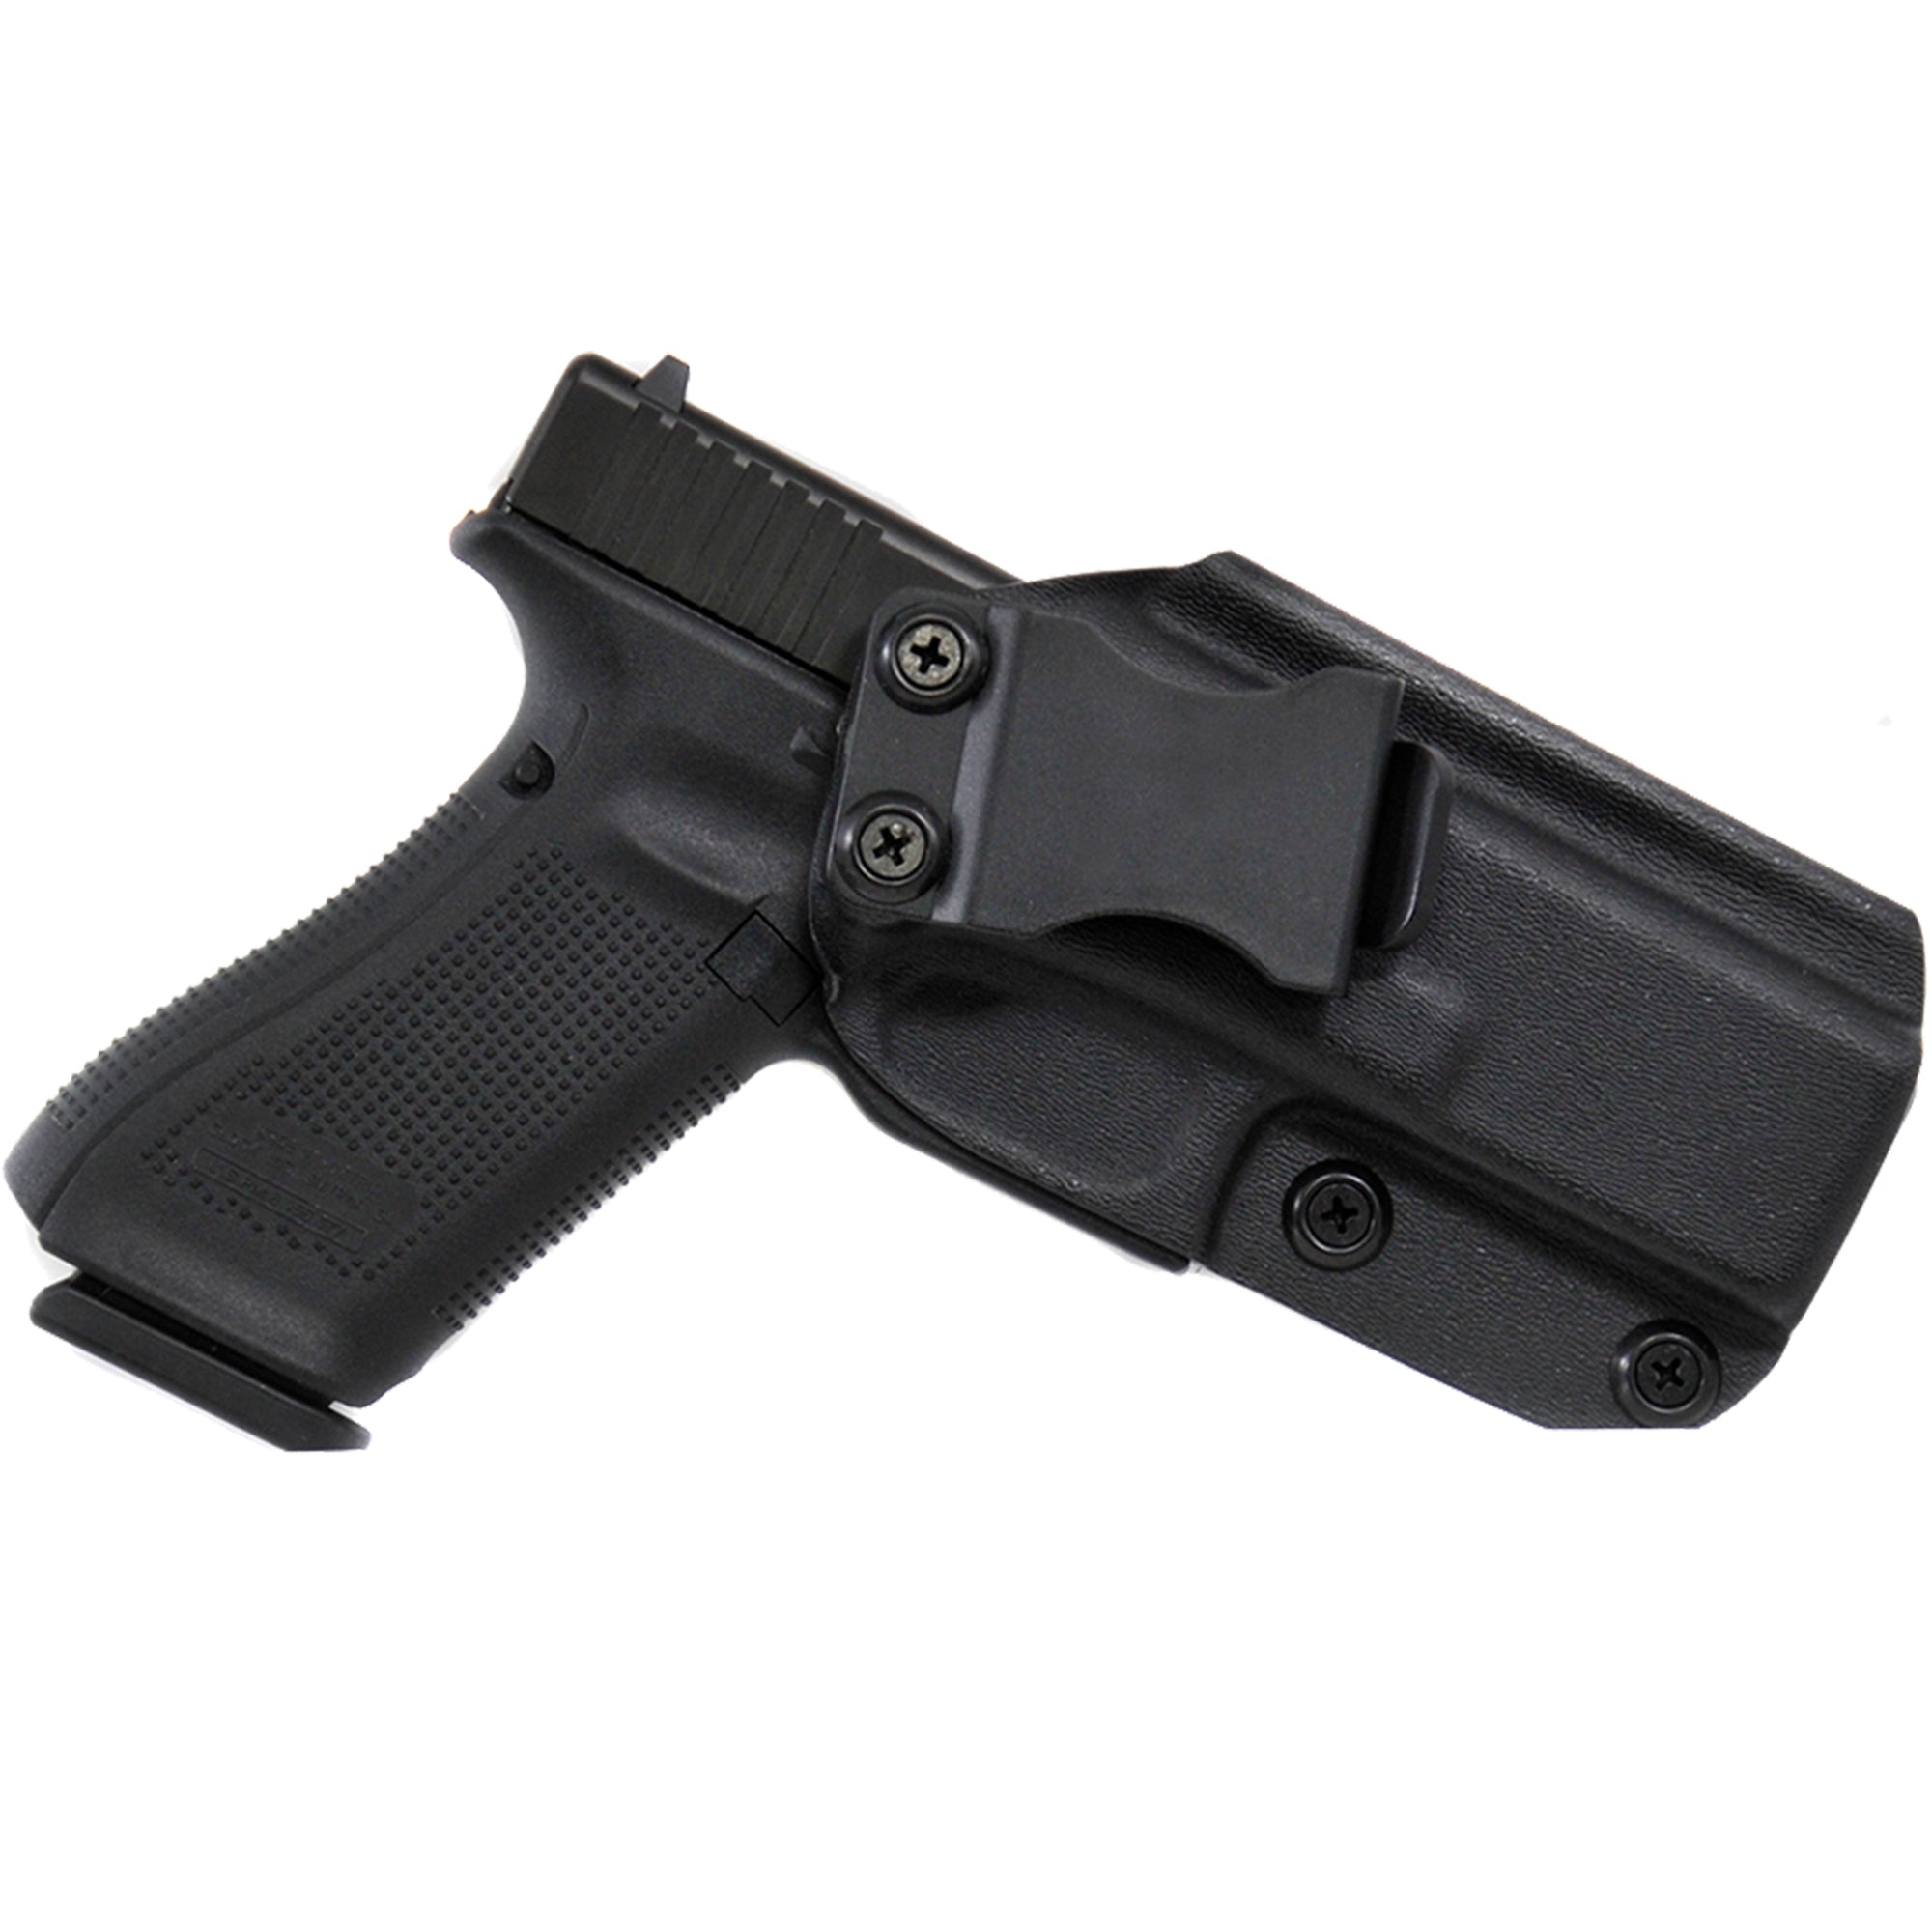 IWB Sweat Guard Holster & Mag Pouch Combo #1